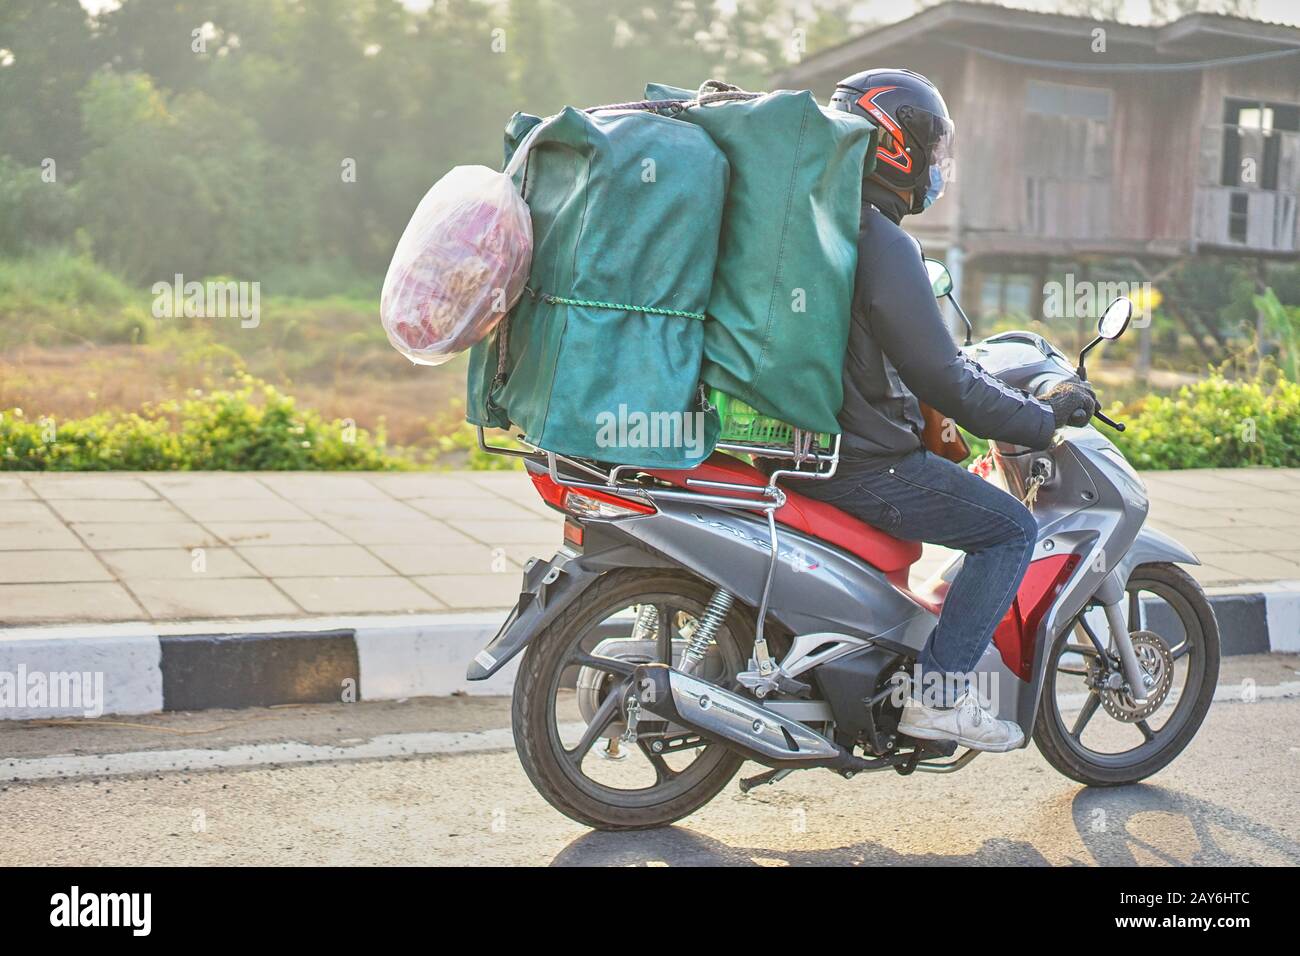 An overloaded motorcycle in Thailand. Stock Photo